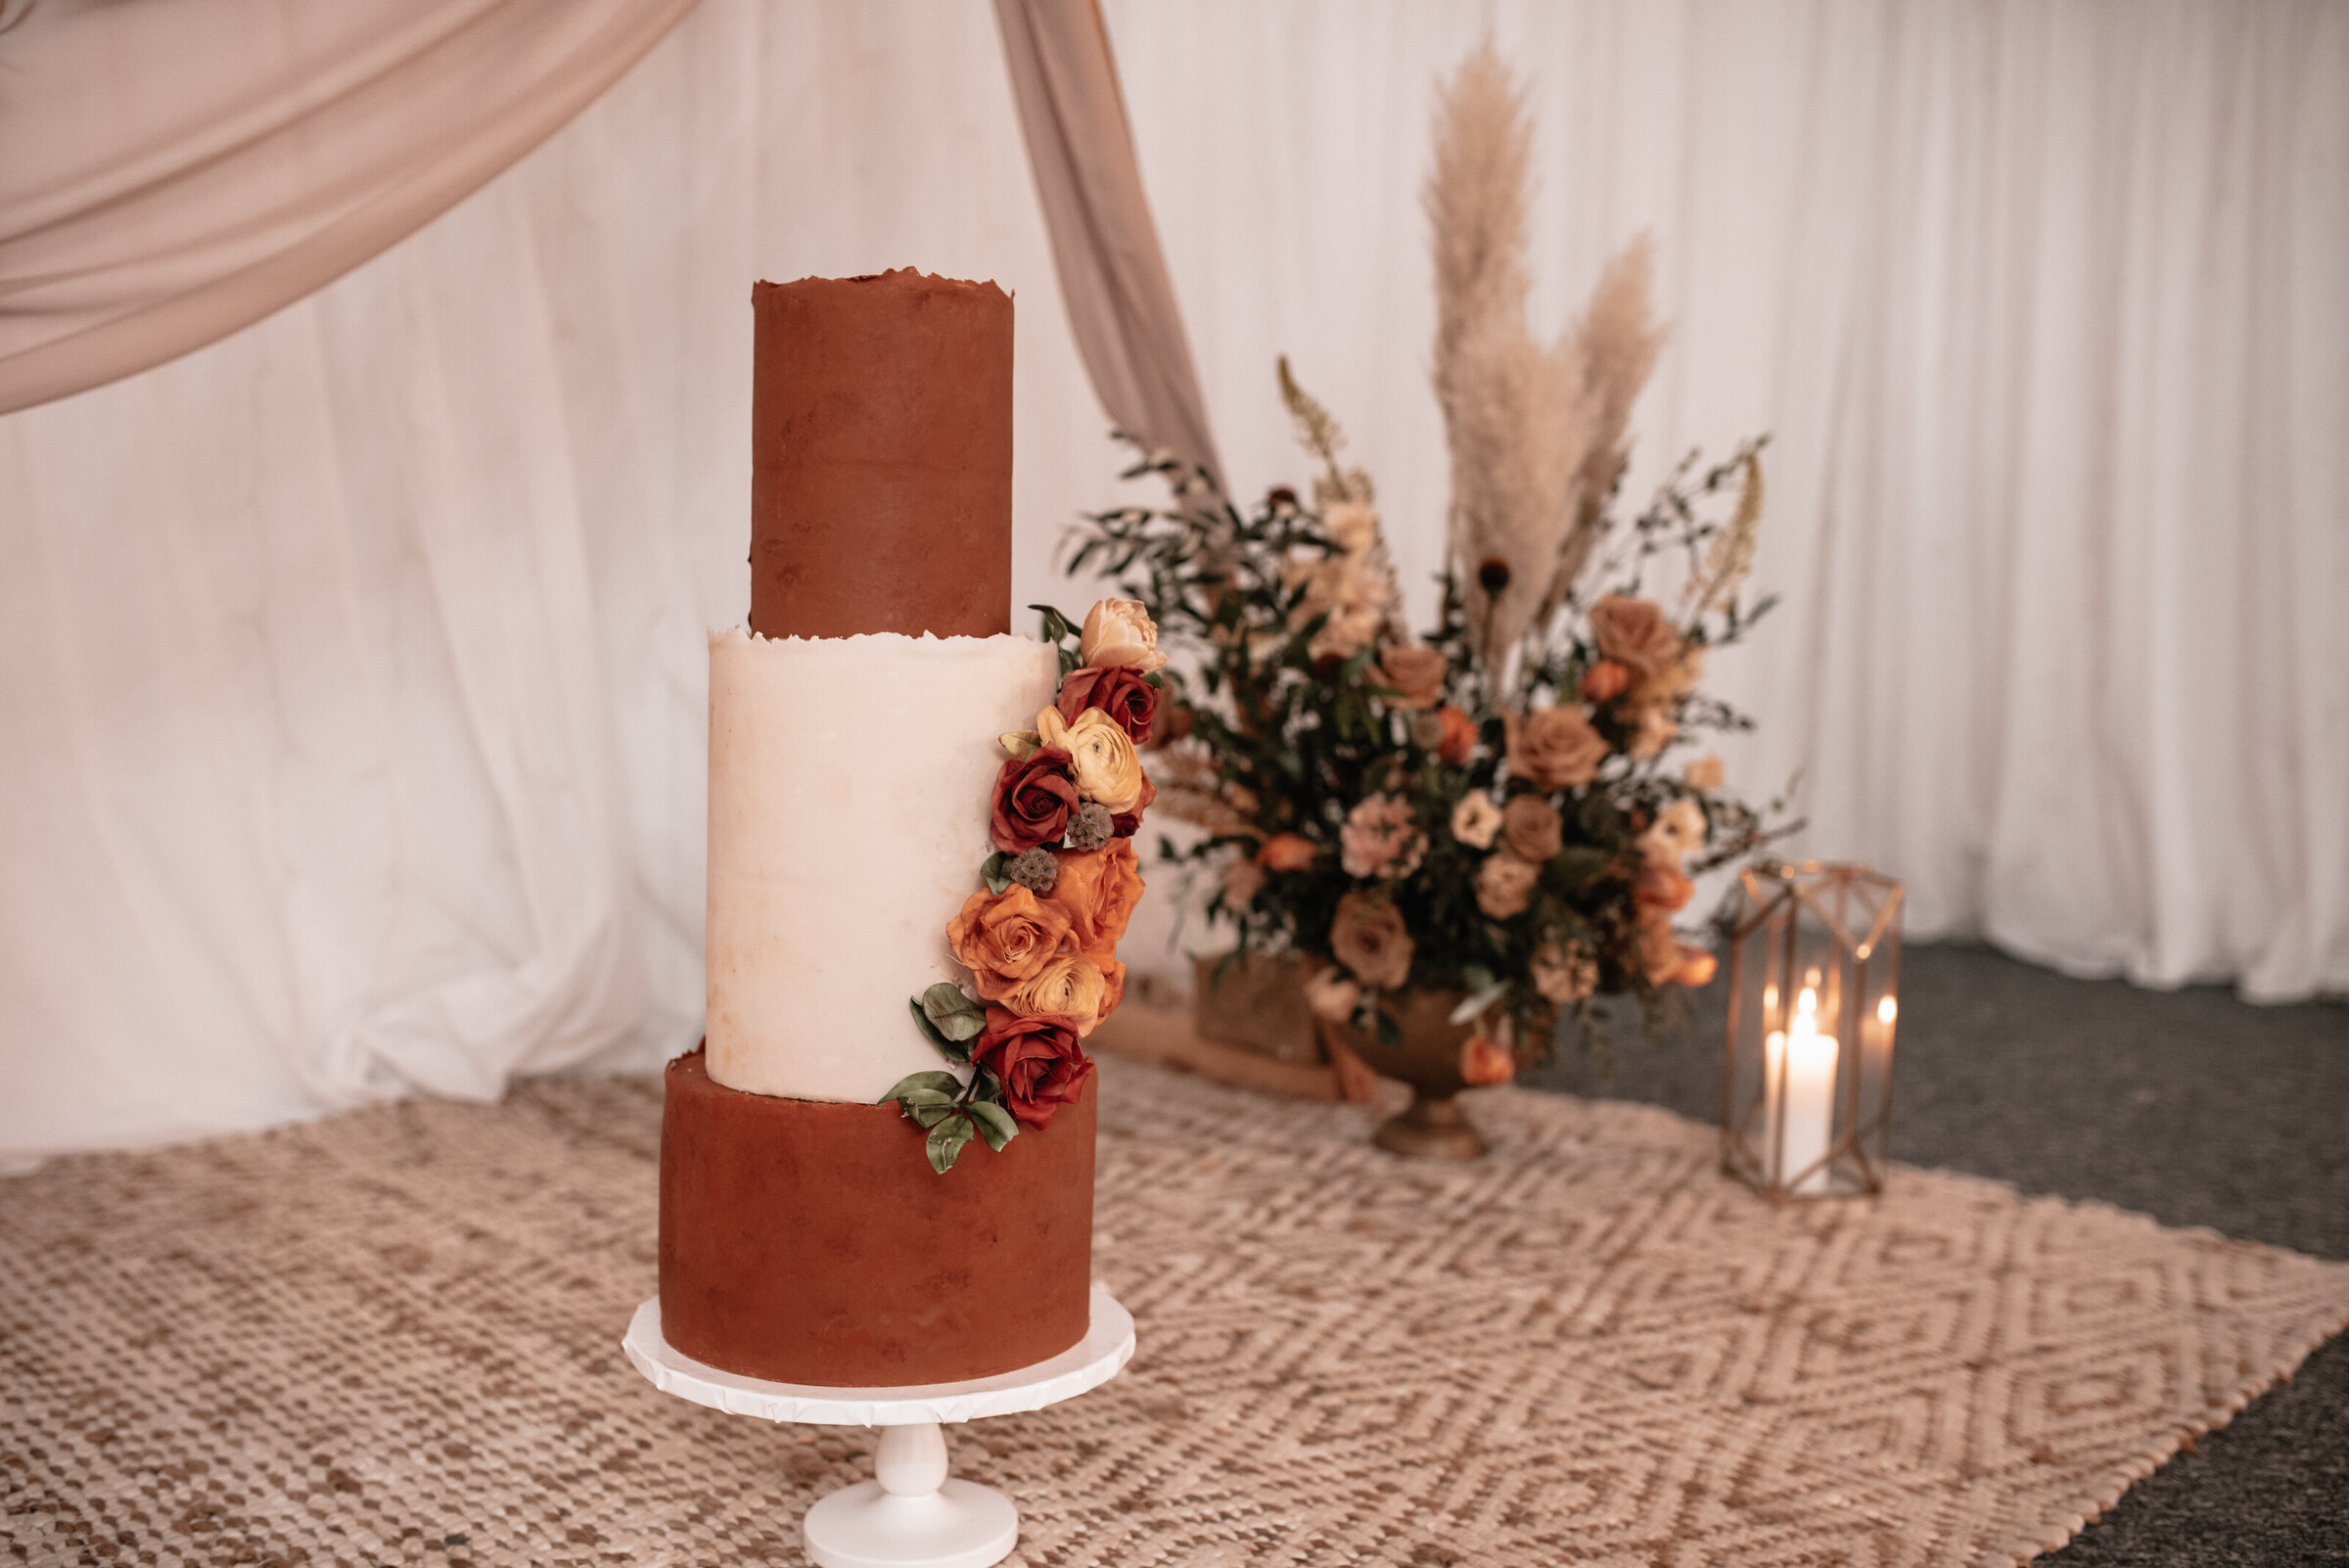 Three tiered wedding cake on stand in front of wedding ceremony floral arrangement